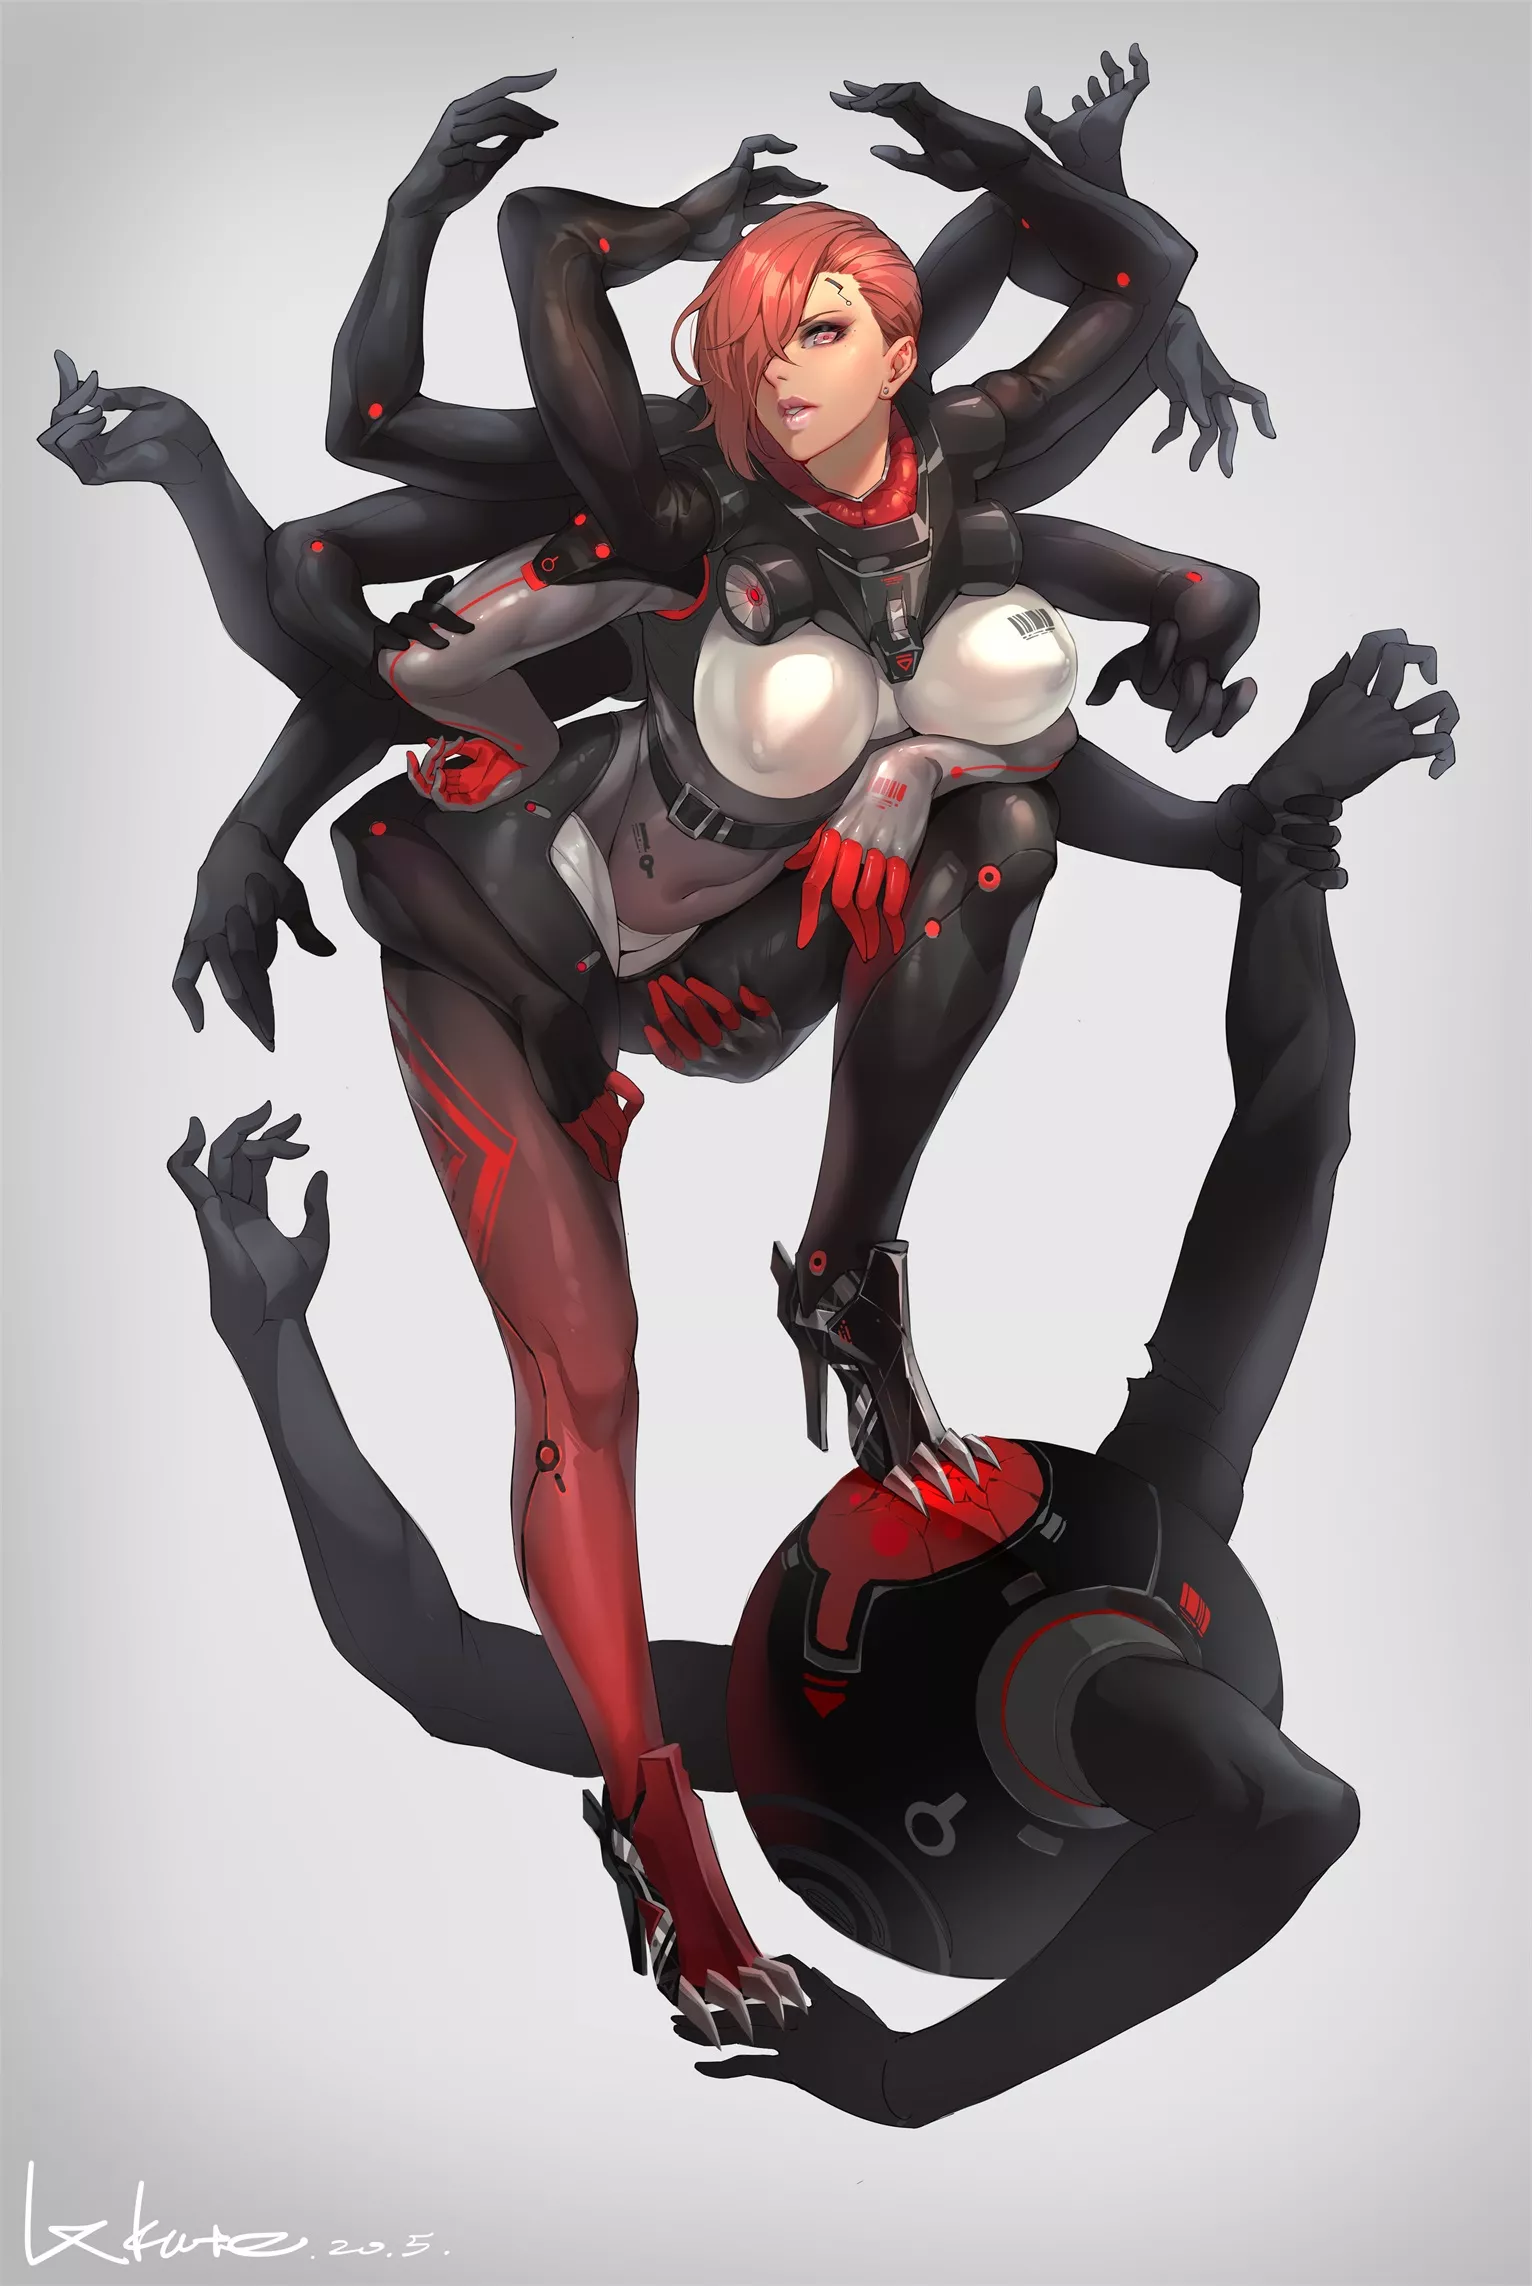 1532px x 2286px - Mistral will crush you lxkate metal gear nudes in animebodysuits |  Onlynudes.org